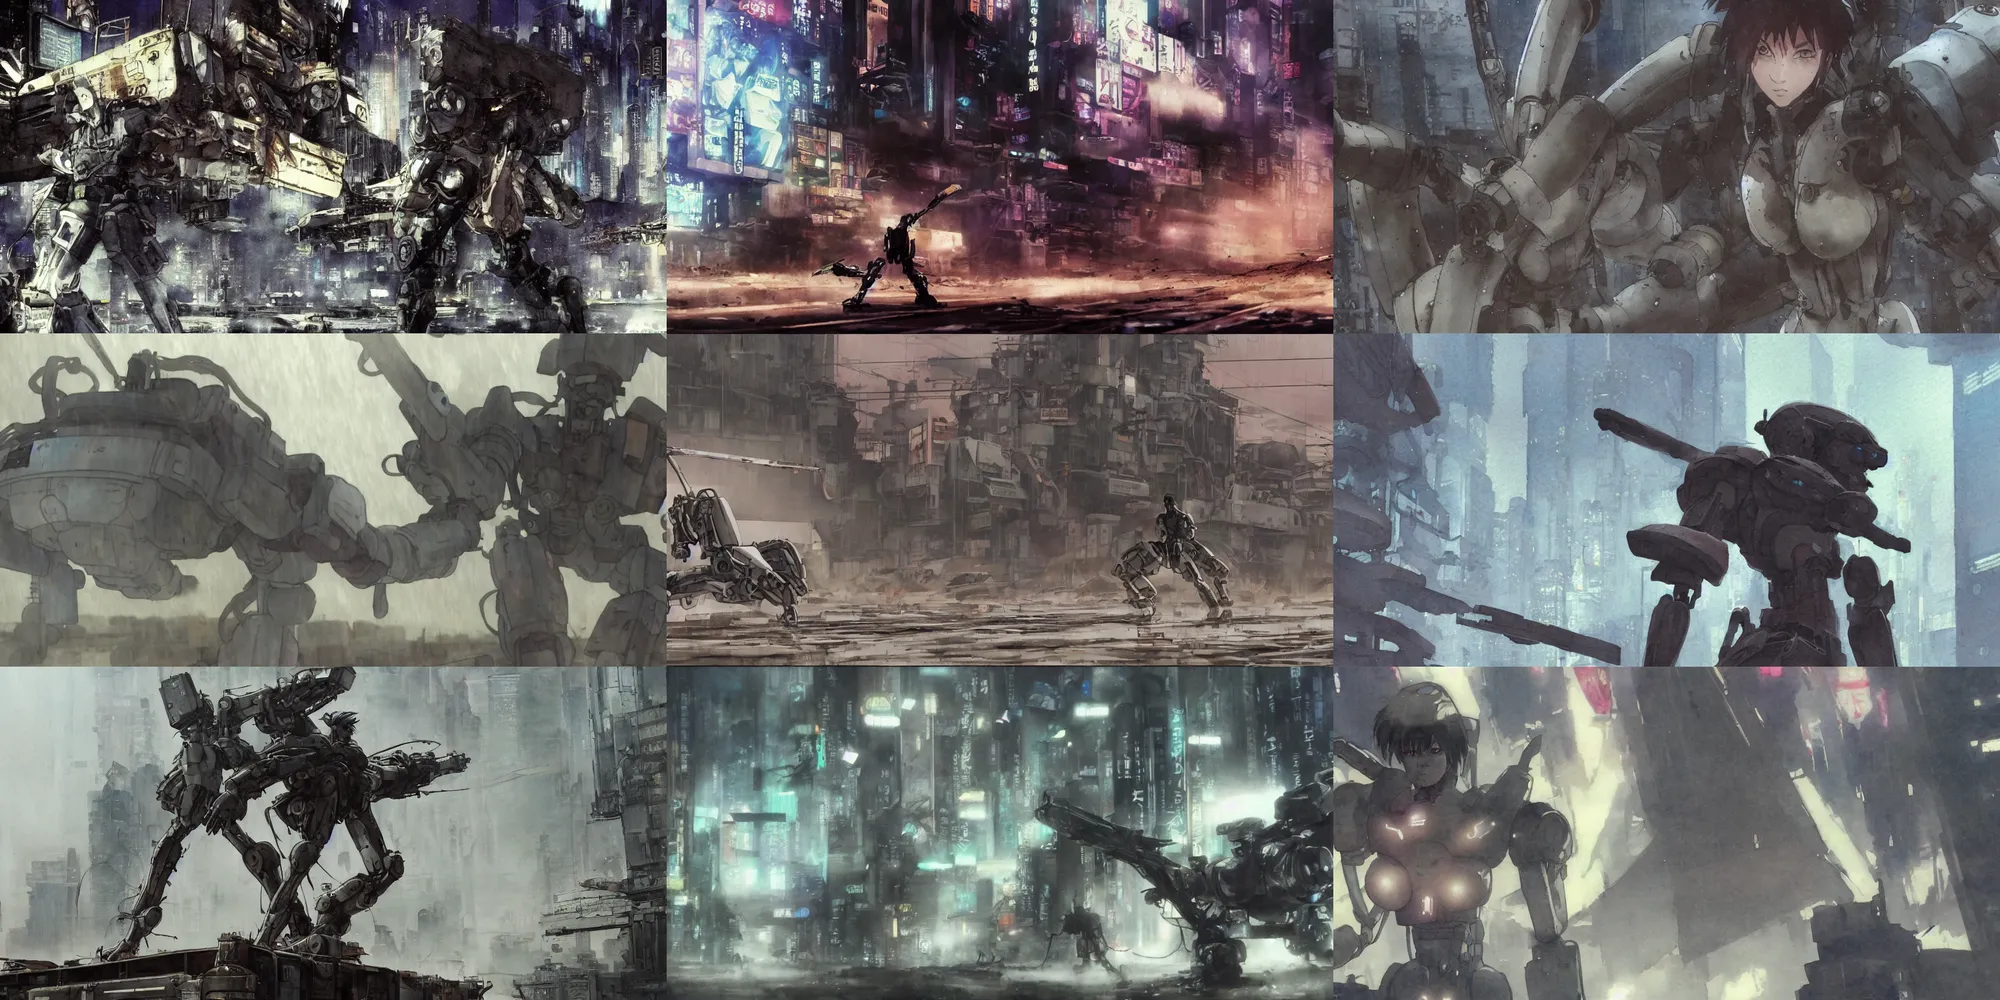 Prompt: incredible screenshot, simple watercolor, masamune shirow ghost in the shell movie scene close up broken Kusanagi tank battle, brown mud, dust, titanic tank with legs, robot arm, ripped to shreds, angry expression, chase ,light rain, rebar ,debris, war-torn, neon advertisements, , hd, 4k, remaster, dynamic camera angle, deep 3 point perspective, fish eye, dynamic scene